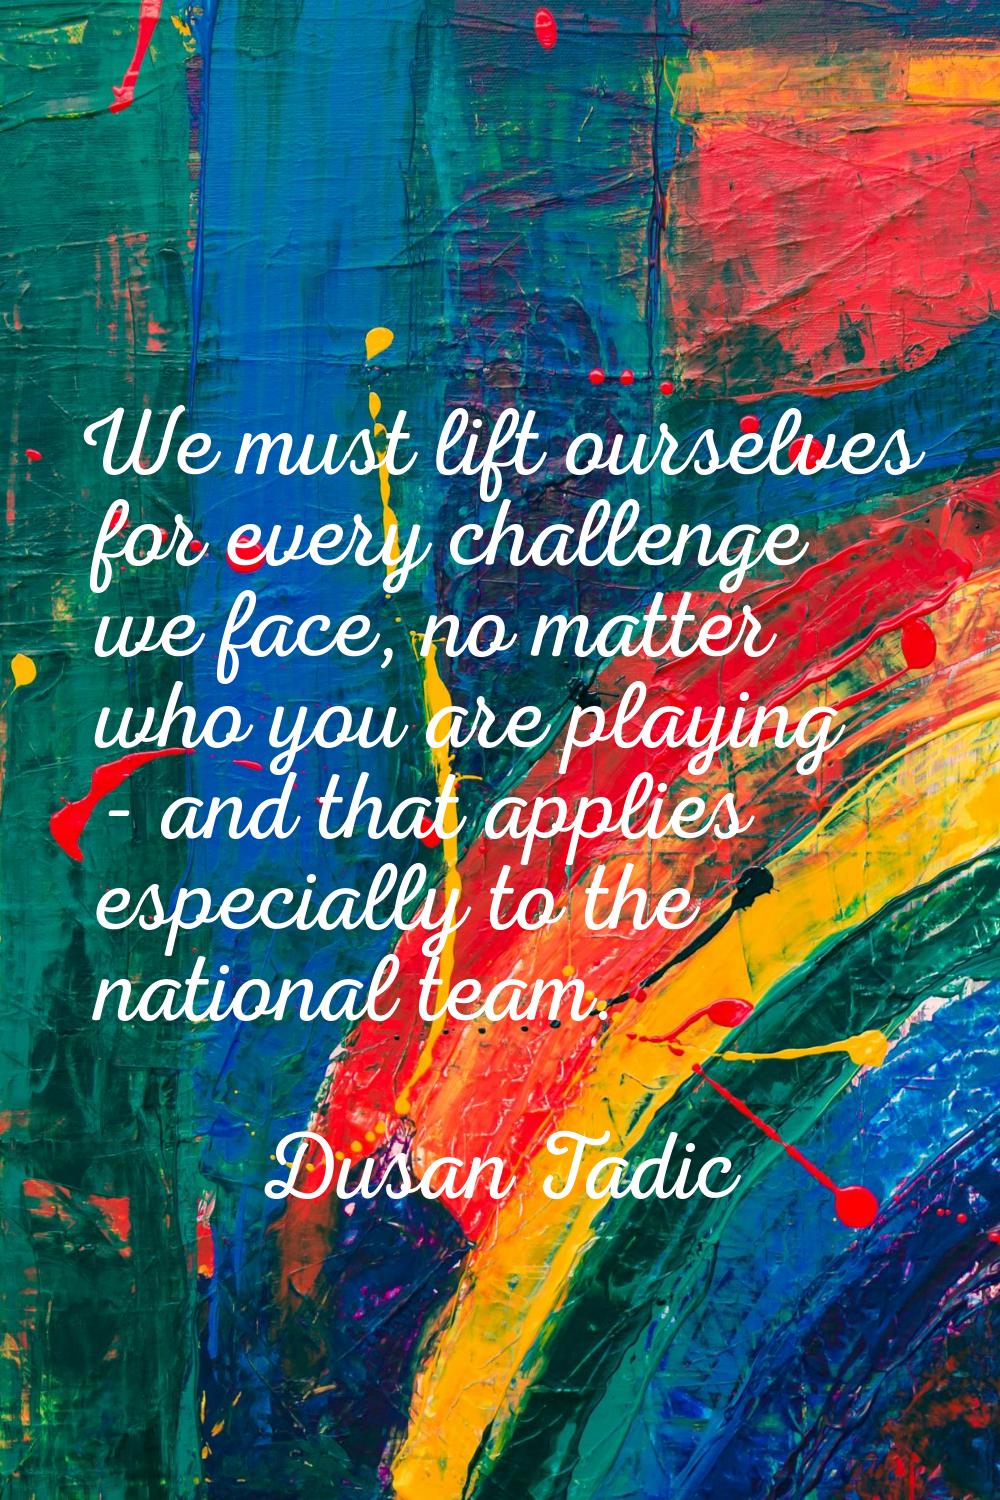 We must lift ourselves for every challenge we face, no matter who you are playing - and that applie